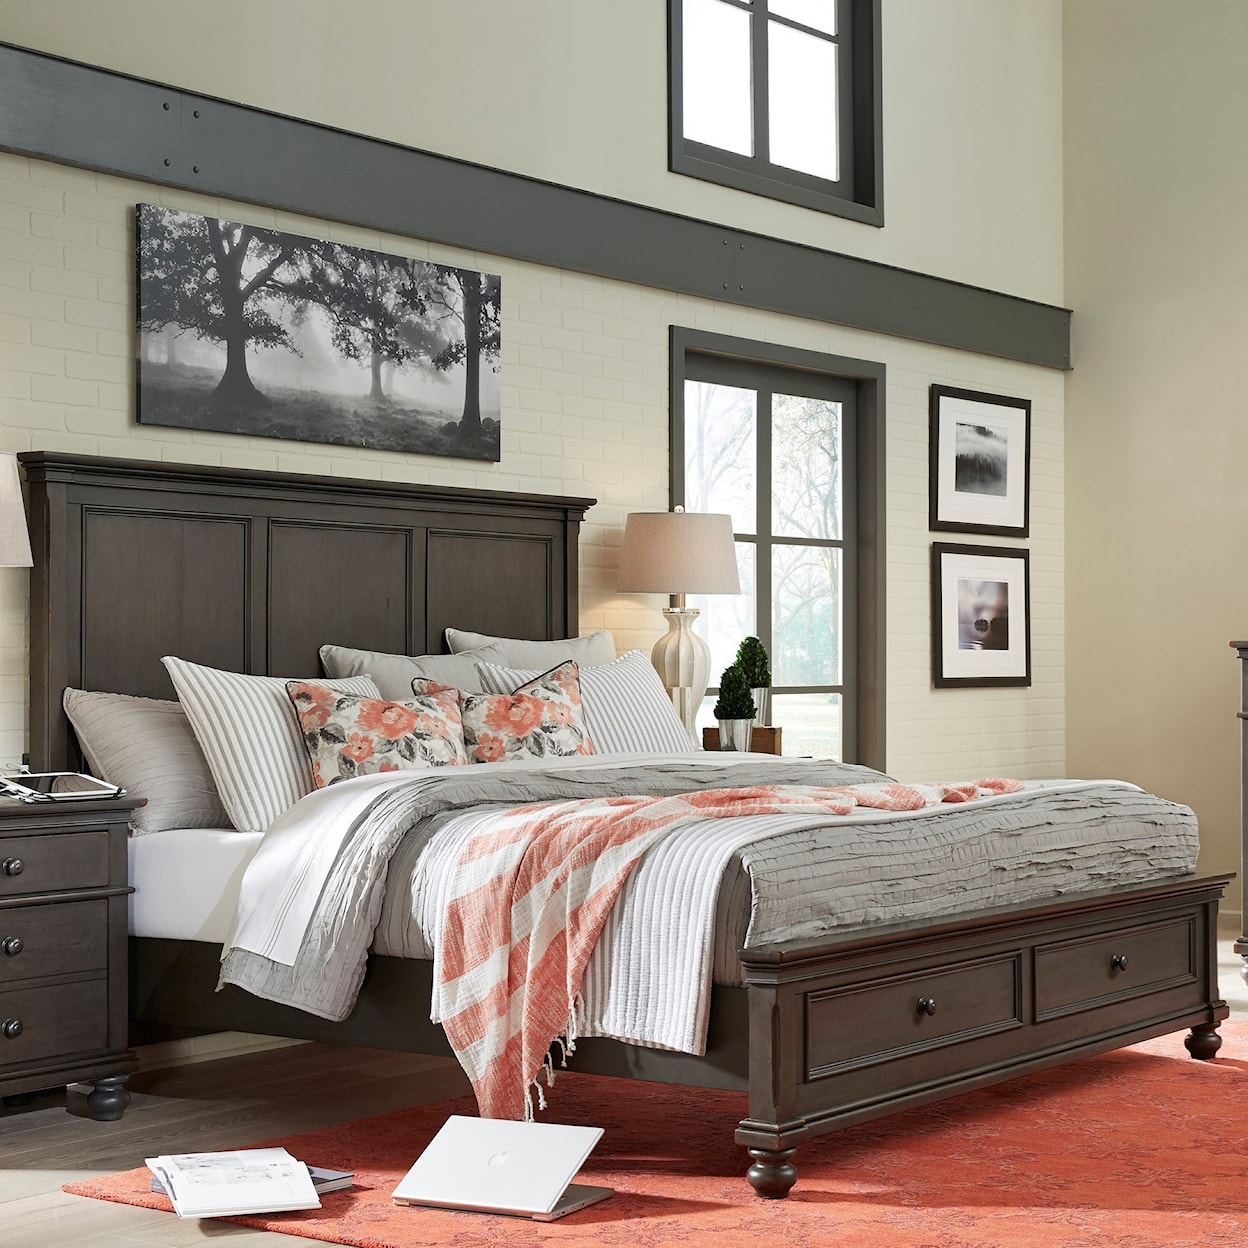 Aspenhome Oxford King Storage Bed